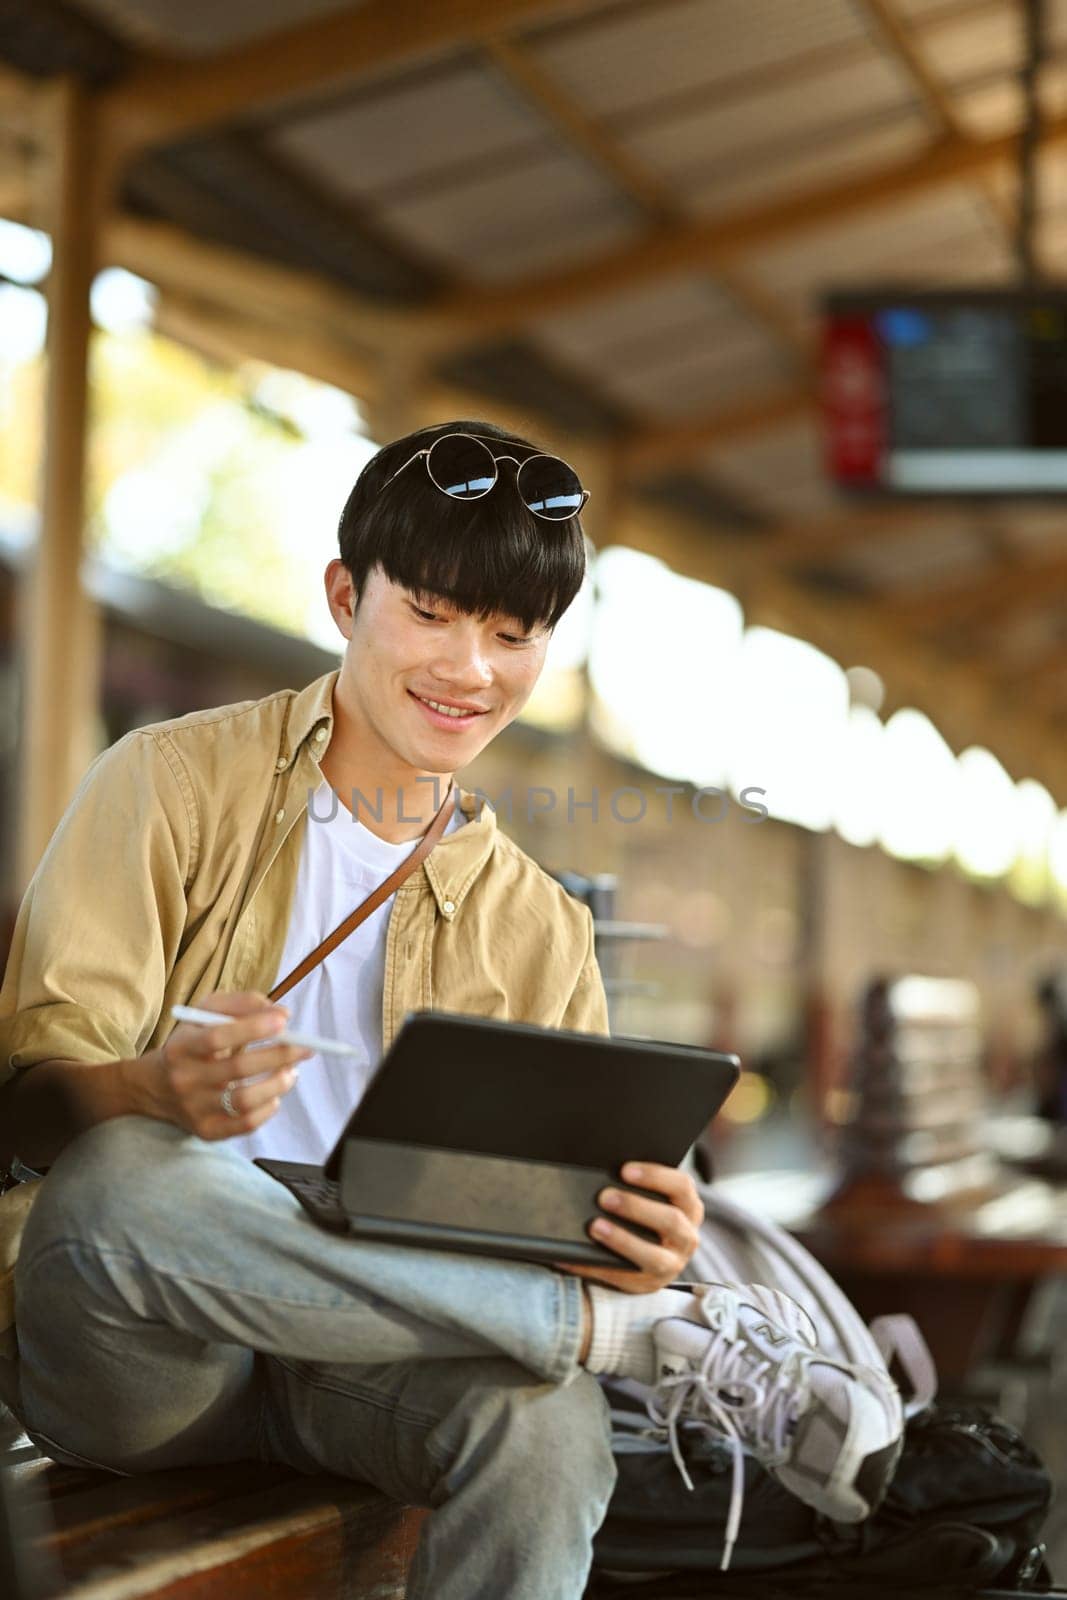 Portrait of young man with a backpack using digital tablet, sitting on a bench at the train station.